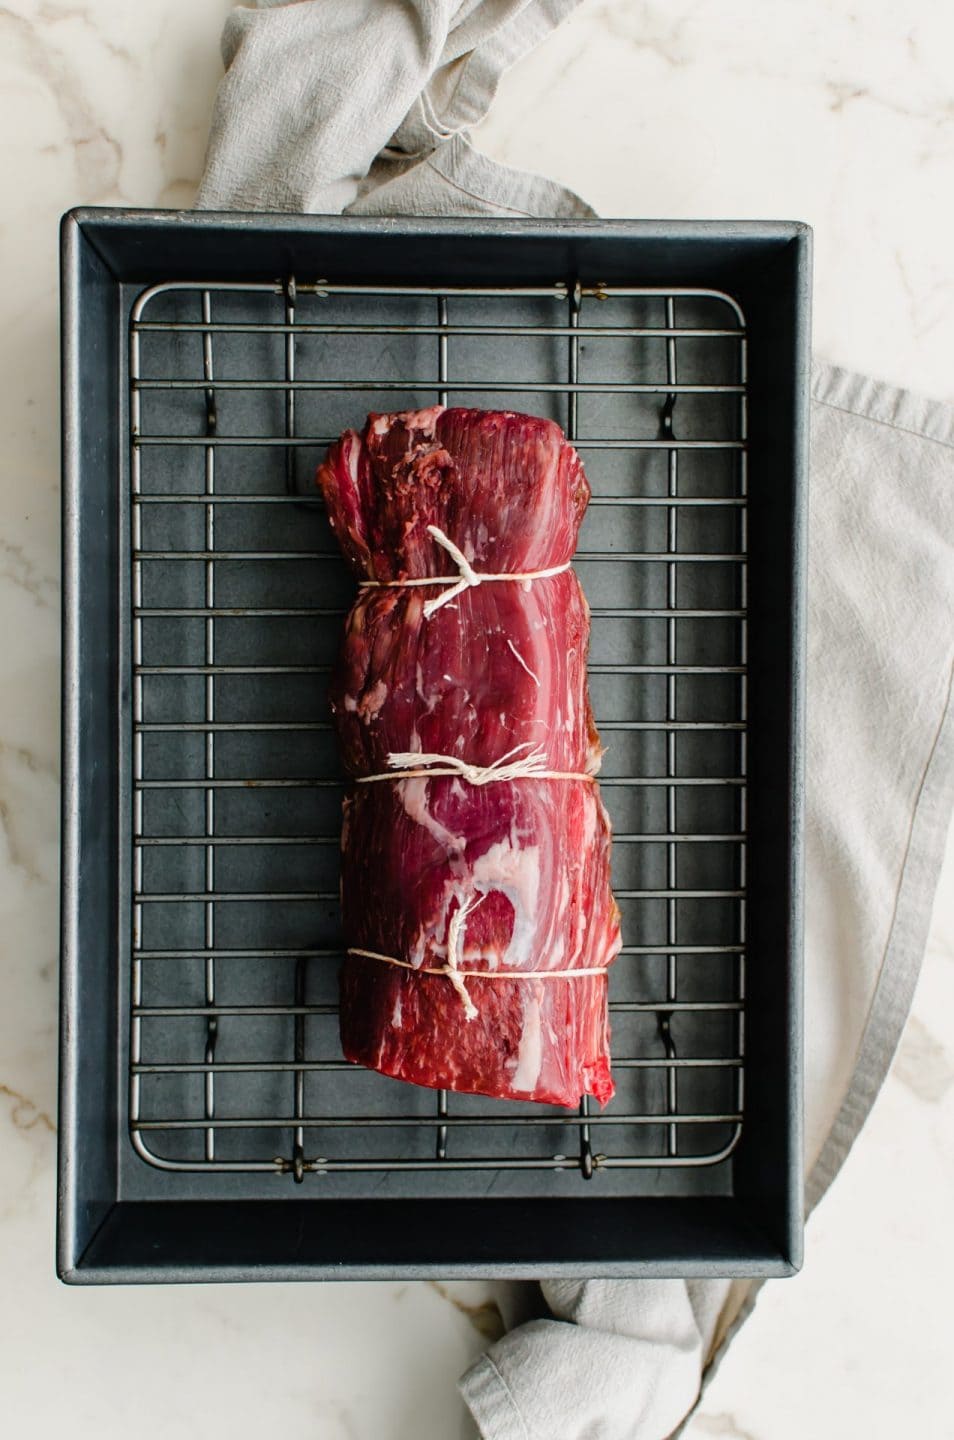 A tied beef tenderloin on a wire rack in a baking dish.